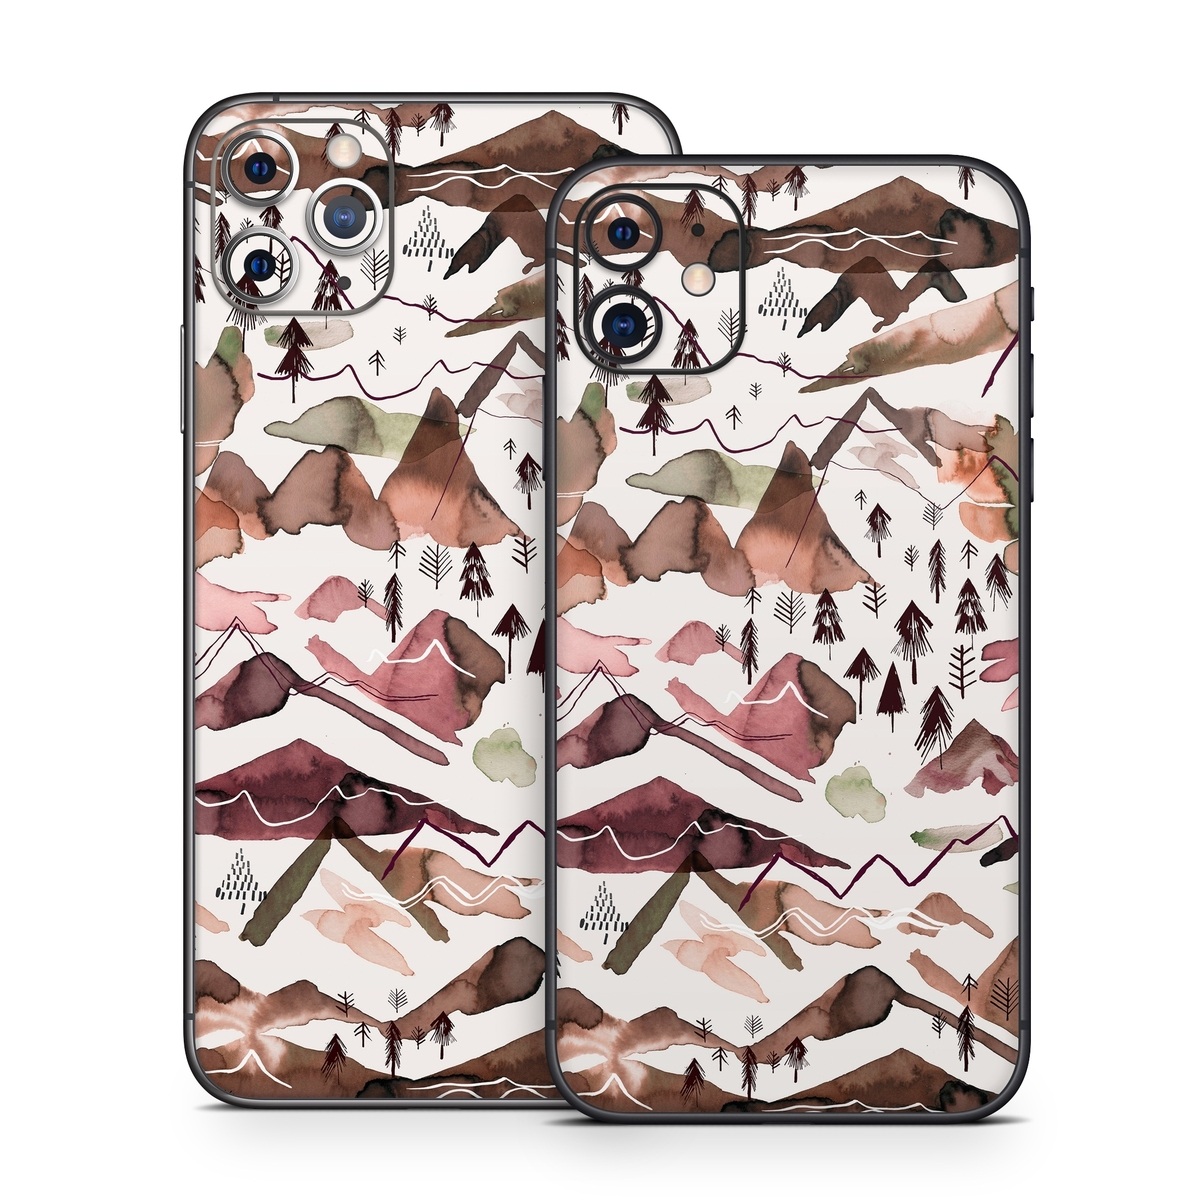 iPhone 11 Series Skin design of Pattern, Design, Leaf, Camouflage, Military camouflage, Illustration, Art, with white, red, black, gray colors